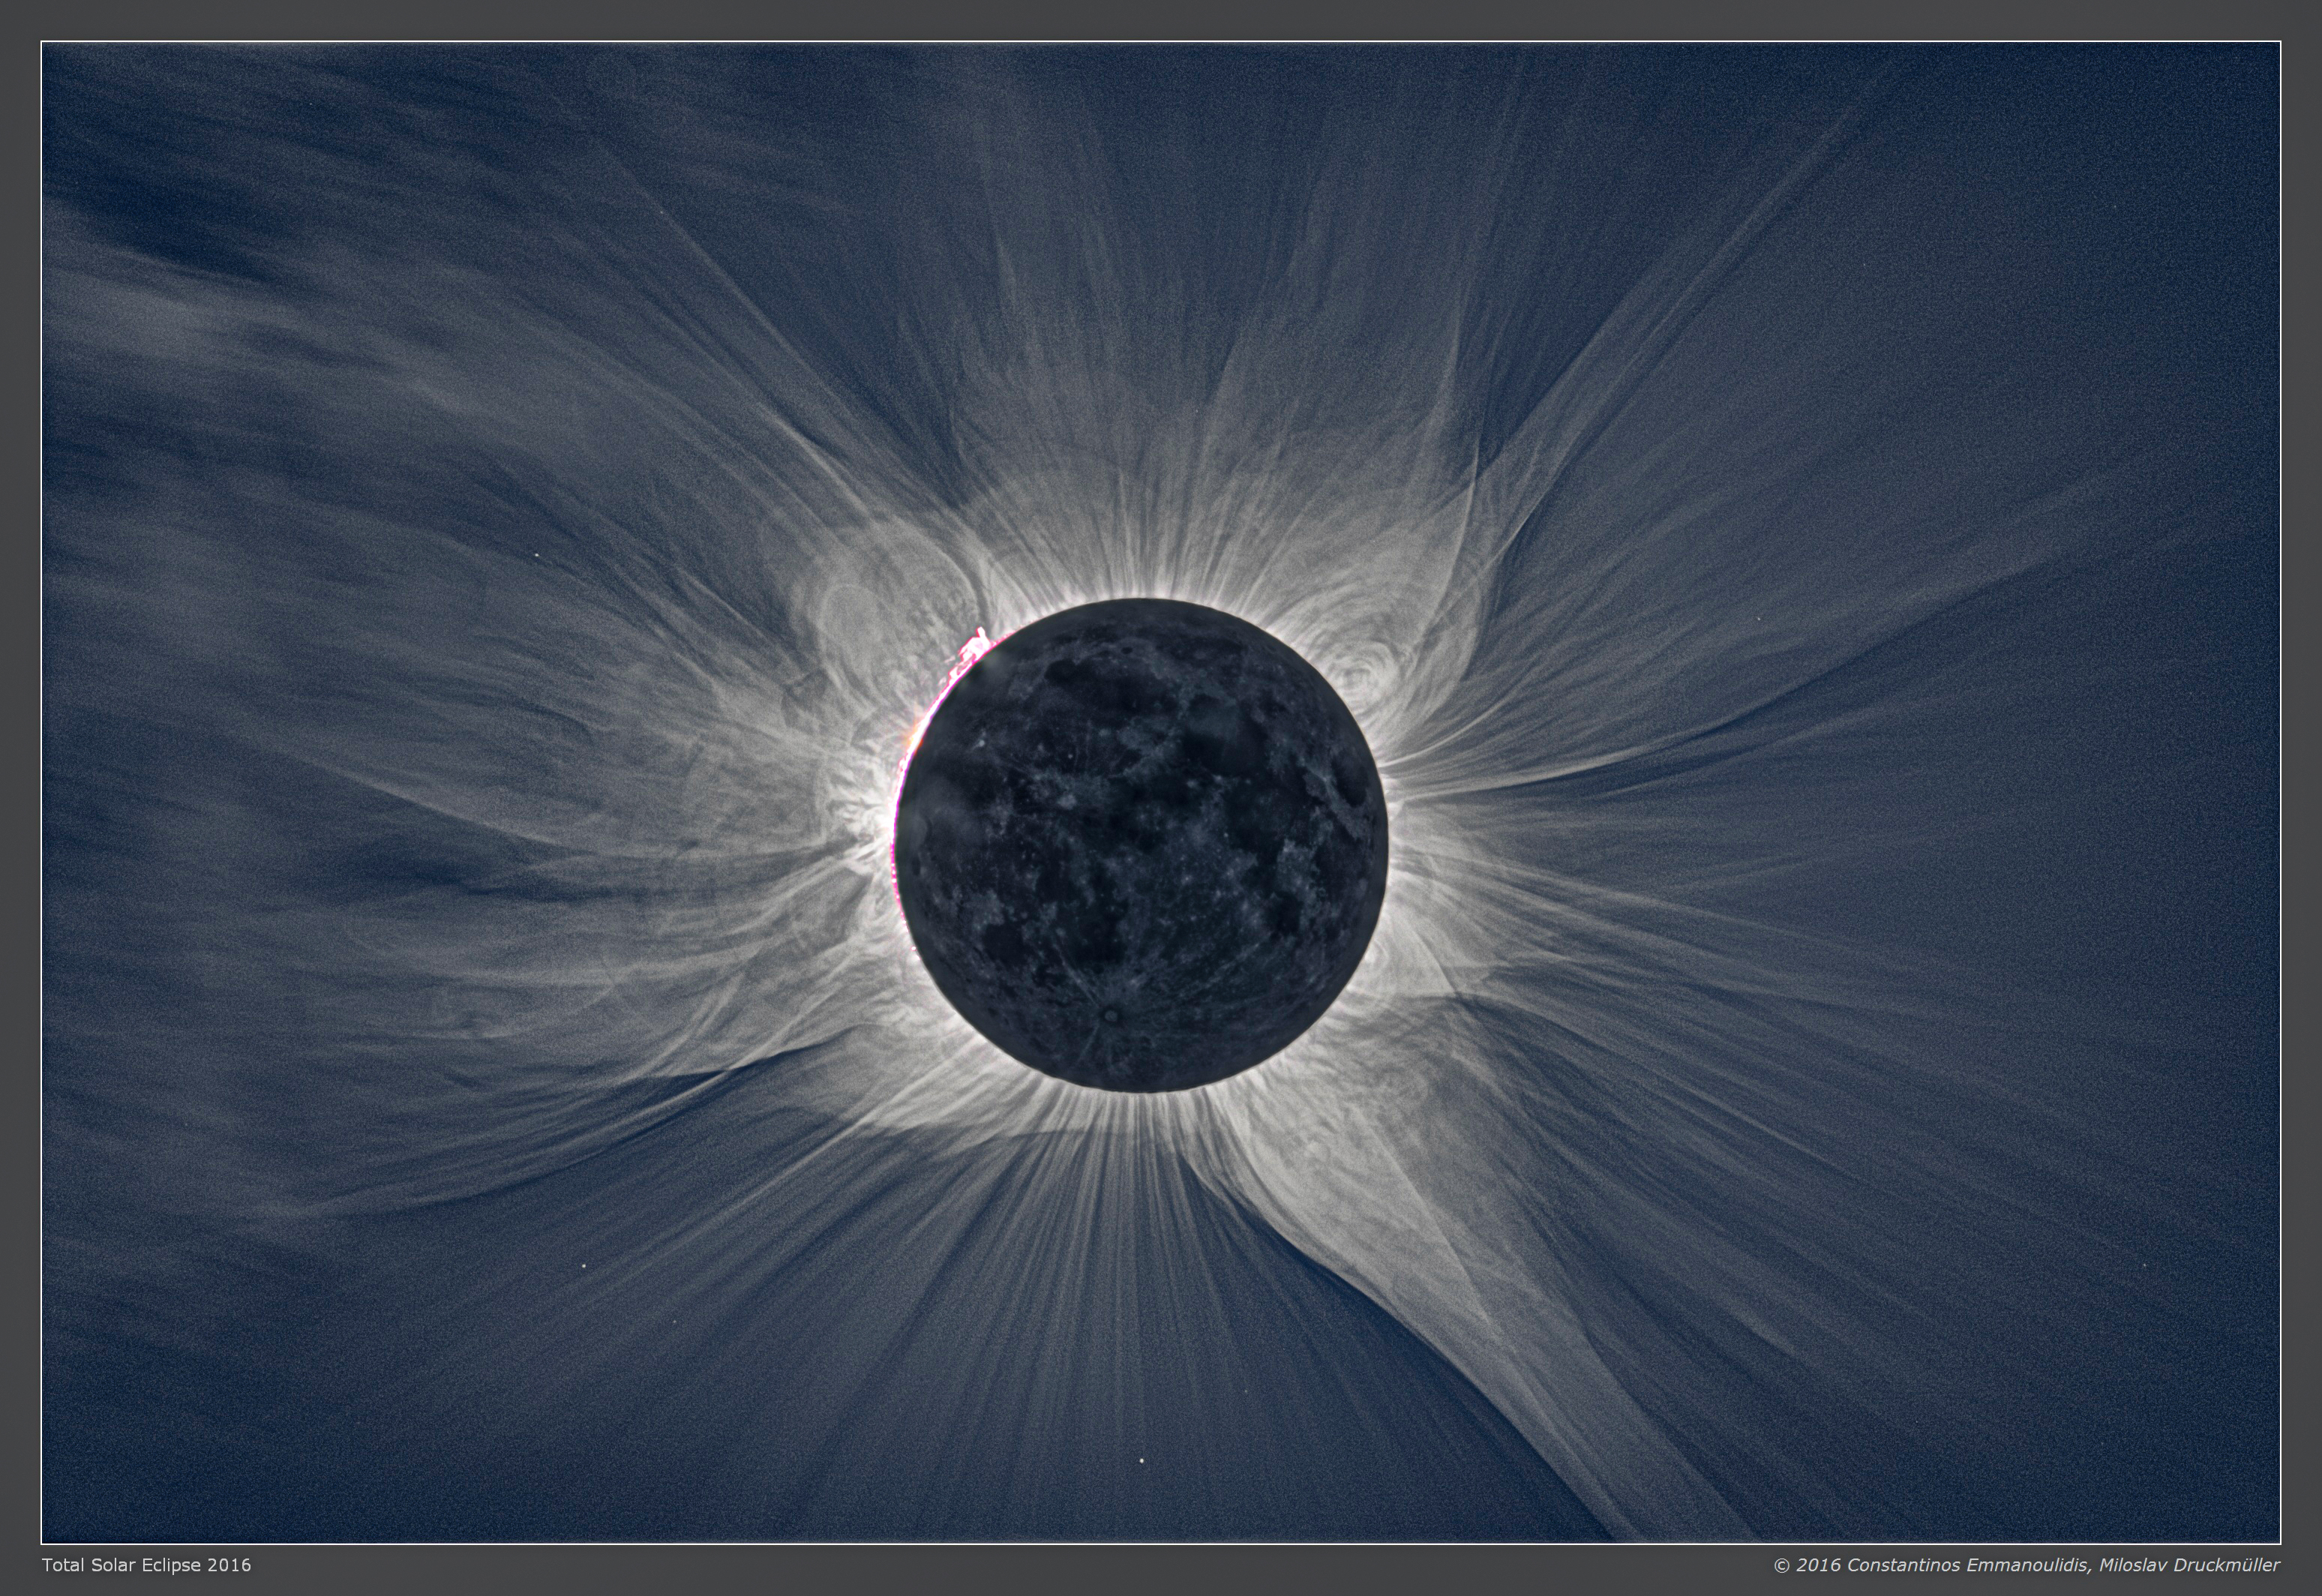 High contrast version of the Sun's Corona with many features shown.